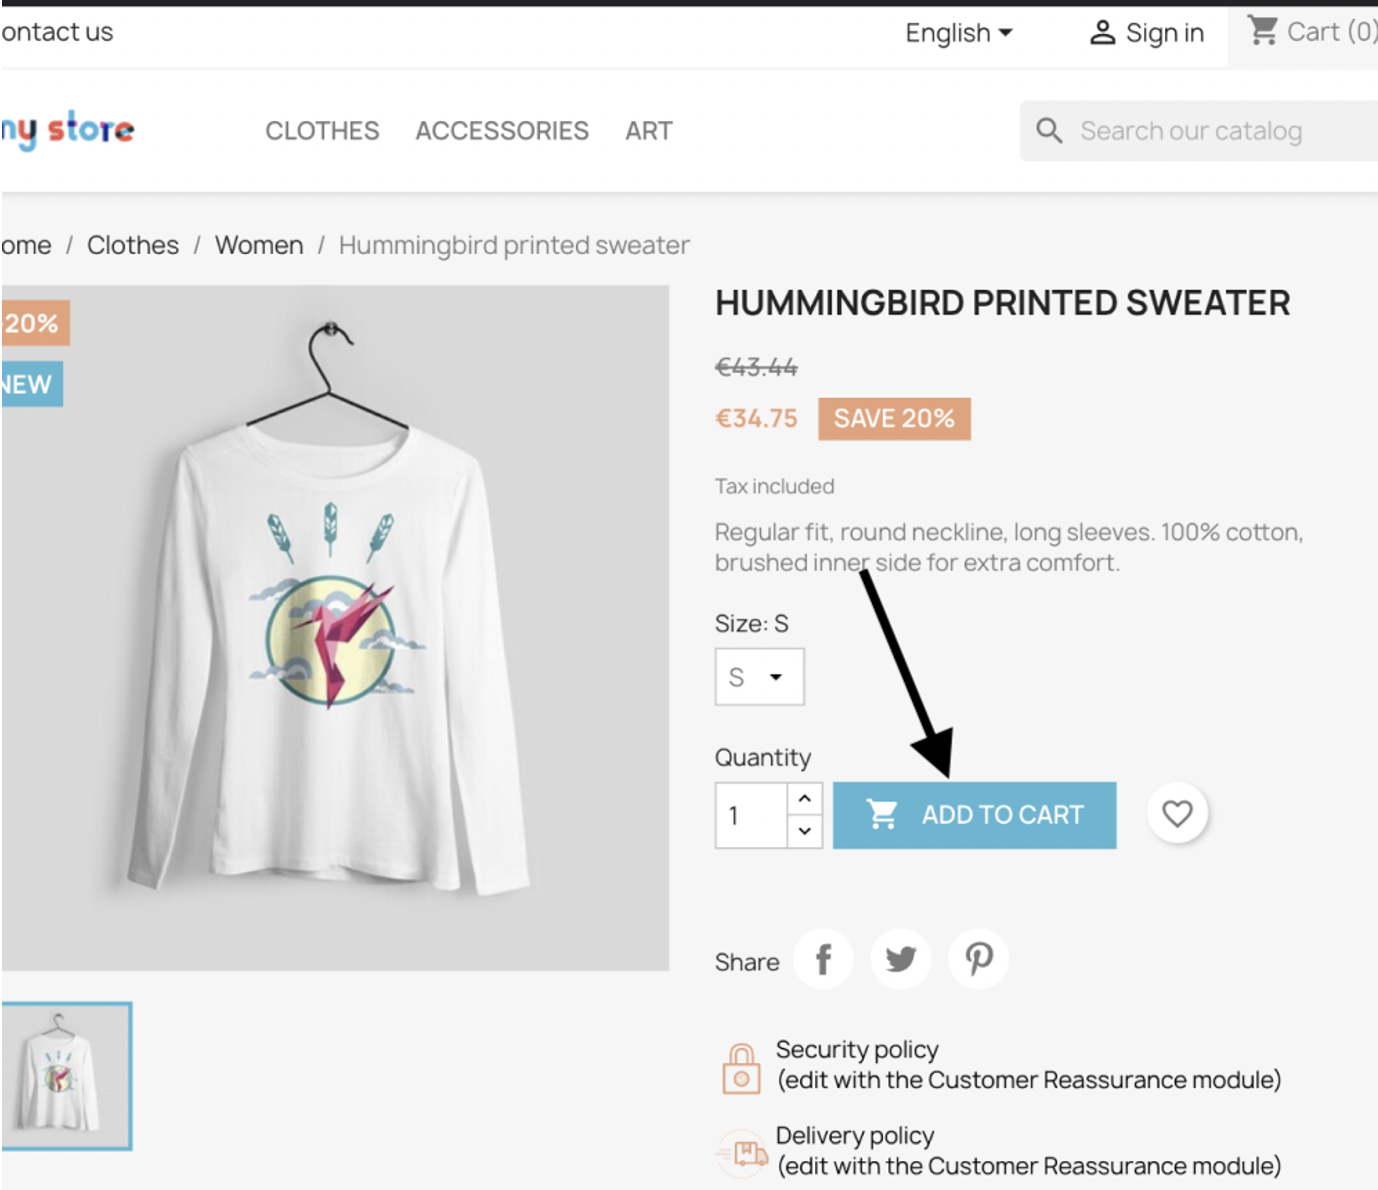 2. Store visitor will be redirected to the appropriate link (defined by admin) after clicking on “Add to cart” button. This link will be opened instead of the native PrestaShop checkout page